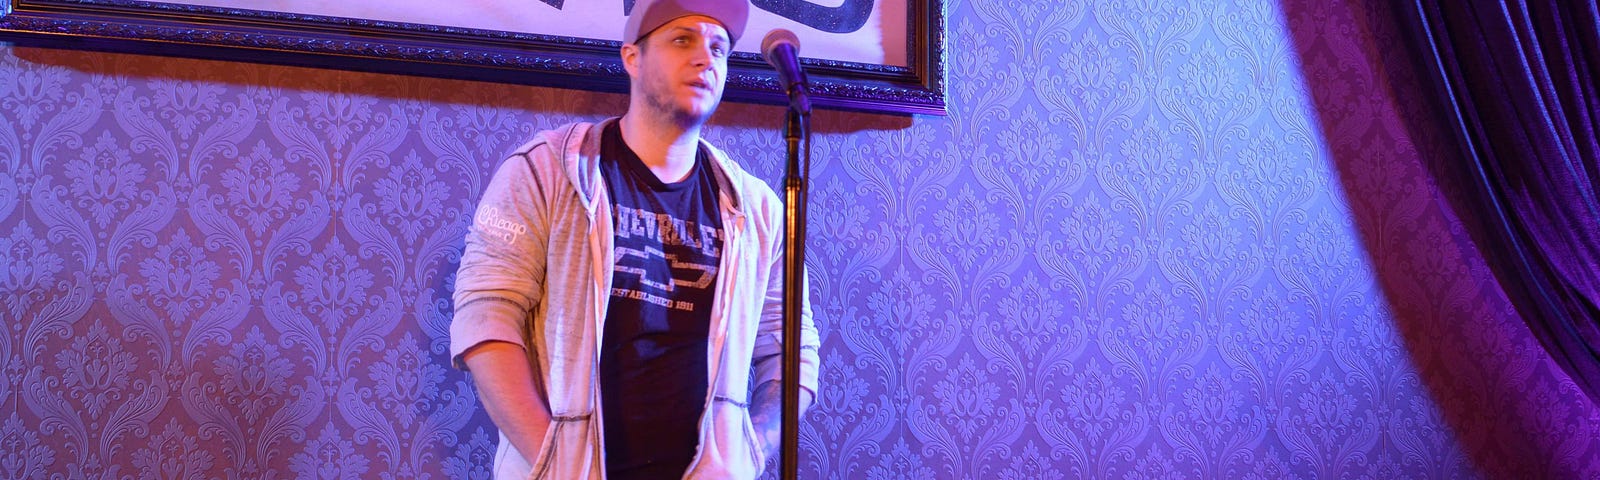 James Webb, who started a comedians’ podcast network from his Roscoe Village home, helped set up a Zoom show for in-person comics at Zanies Comedy Club in Rosemont. Photographer: Gianfranco Ocampo